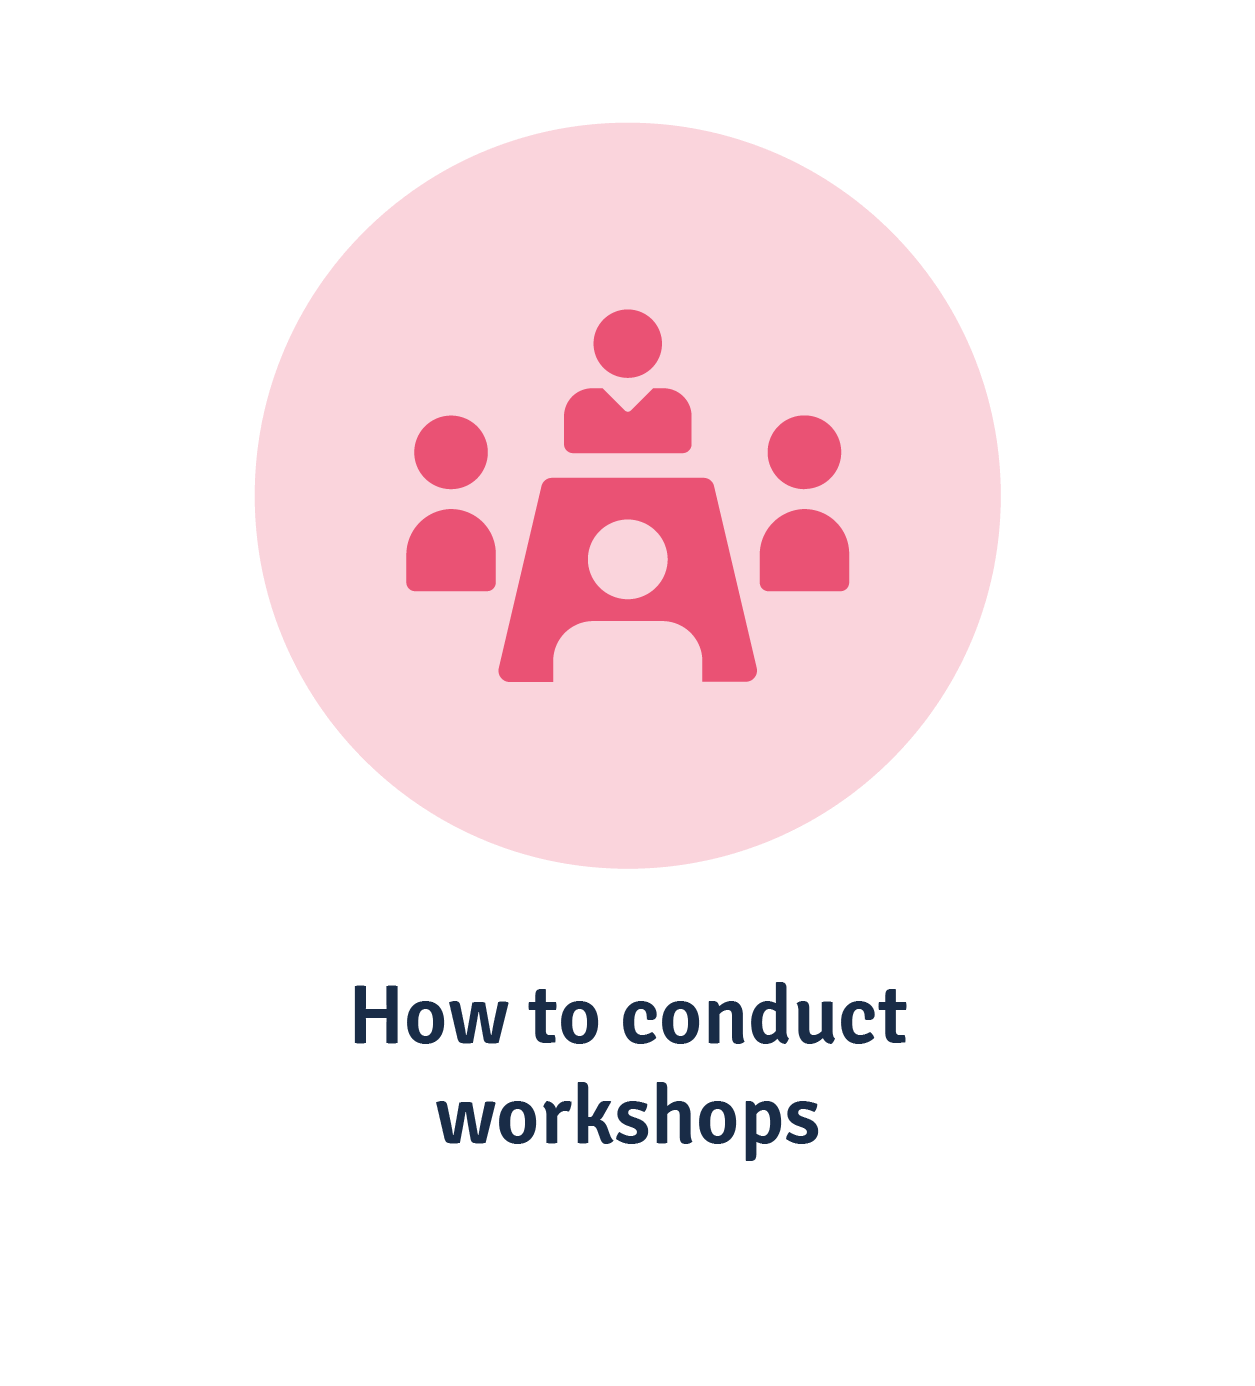 How to conduct workshops